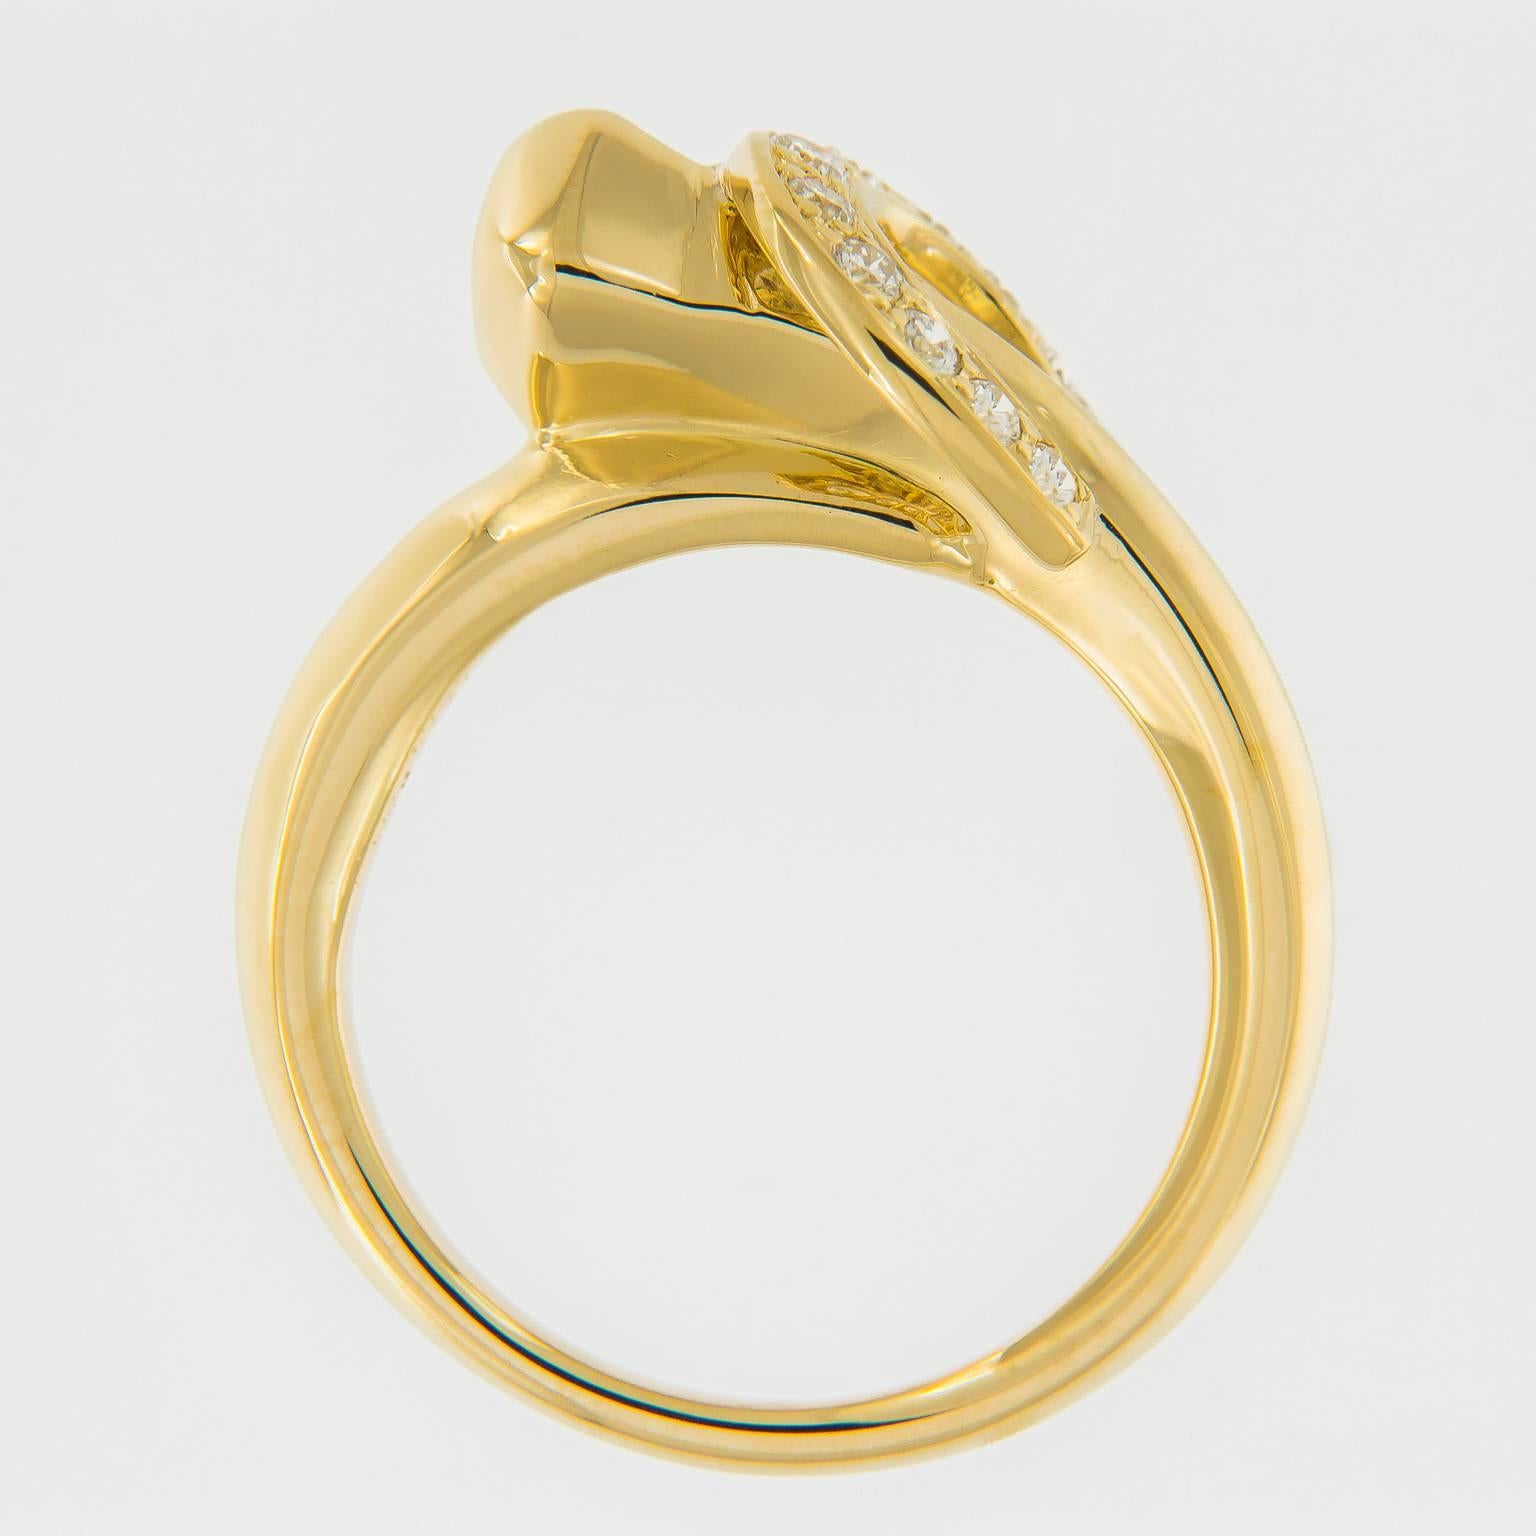 This rarely seen 18k yellow gold ring from Cartier combines its iconic nail design with a horseshoe that features 11 pave set diamonds. Ring Size 6.5.

Diamonds 0.22 cttw
Marked Cartier